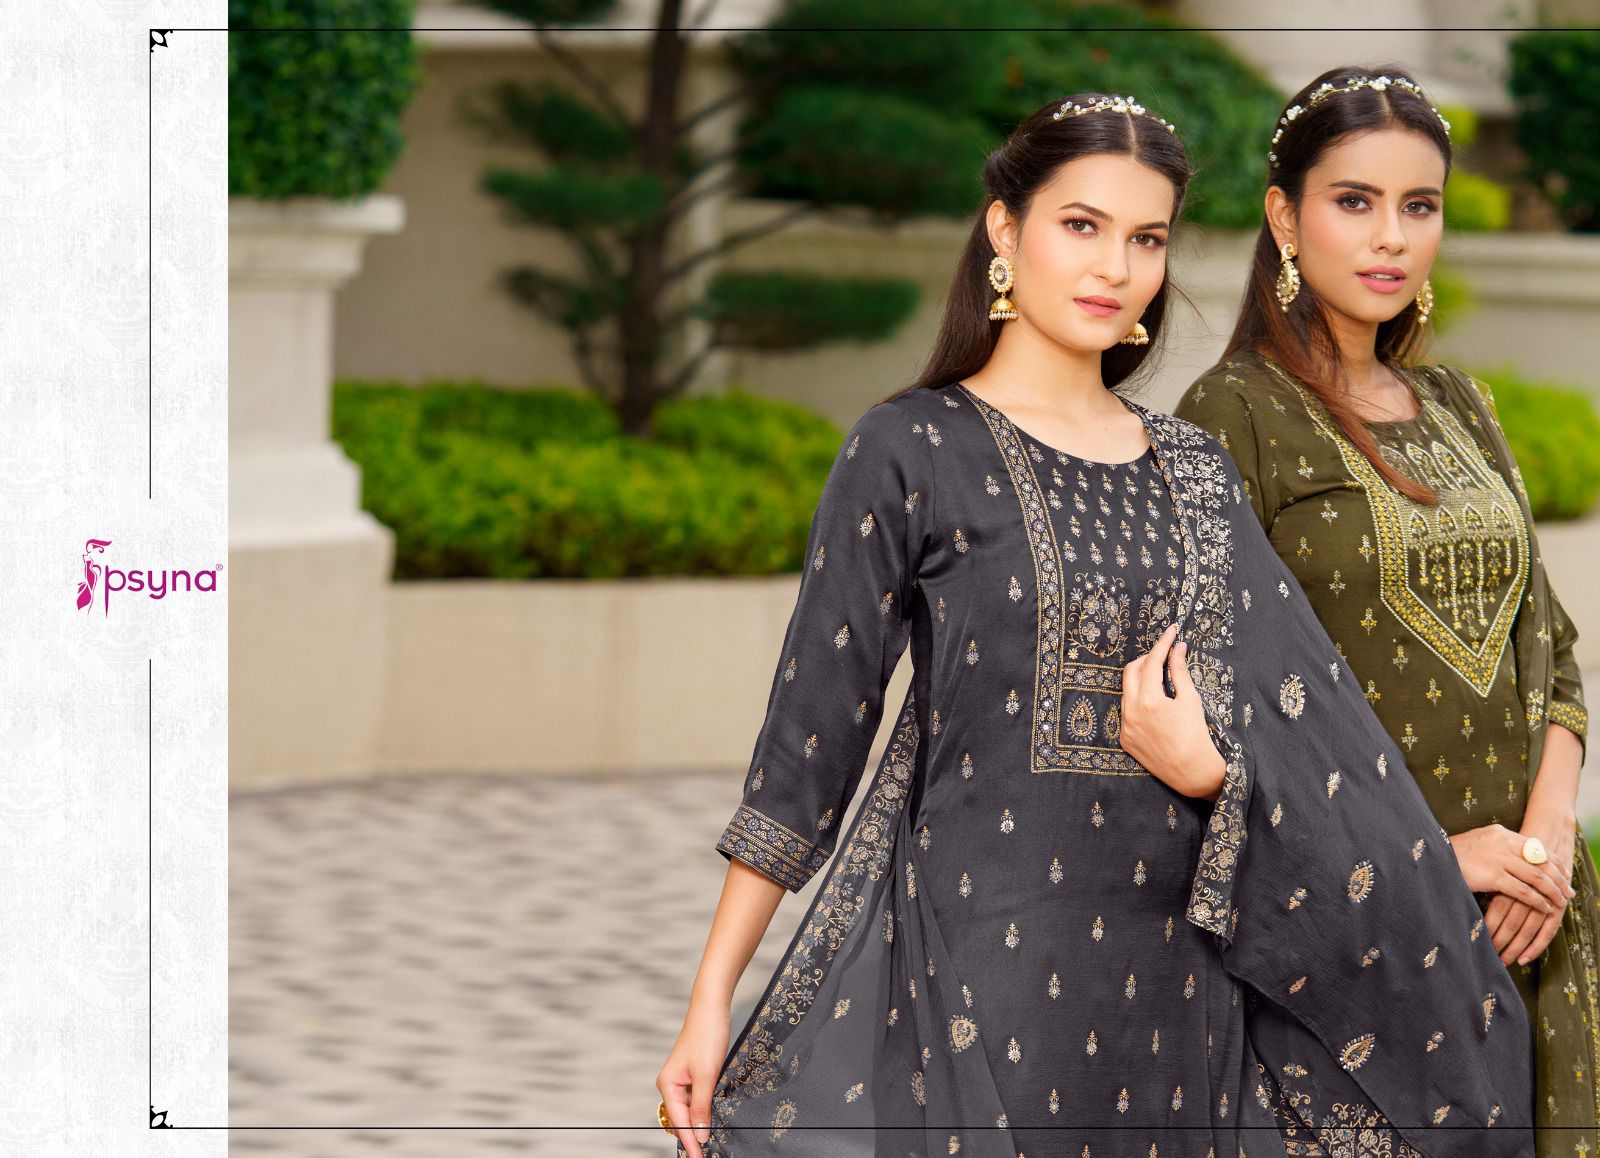 Psyna Silk India collection 4